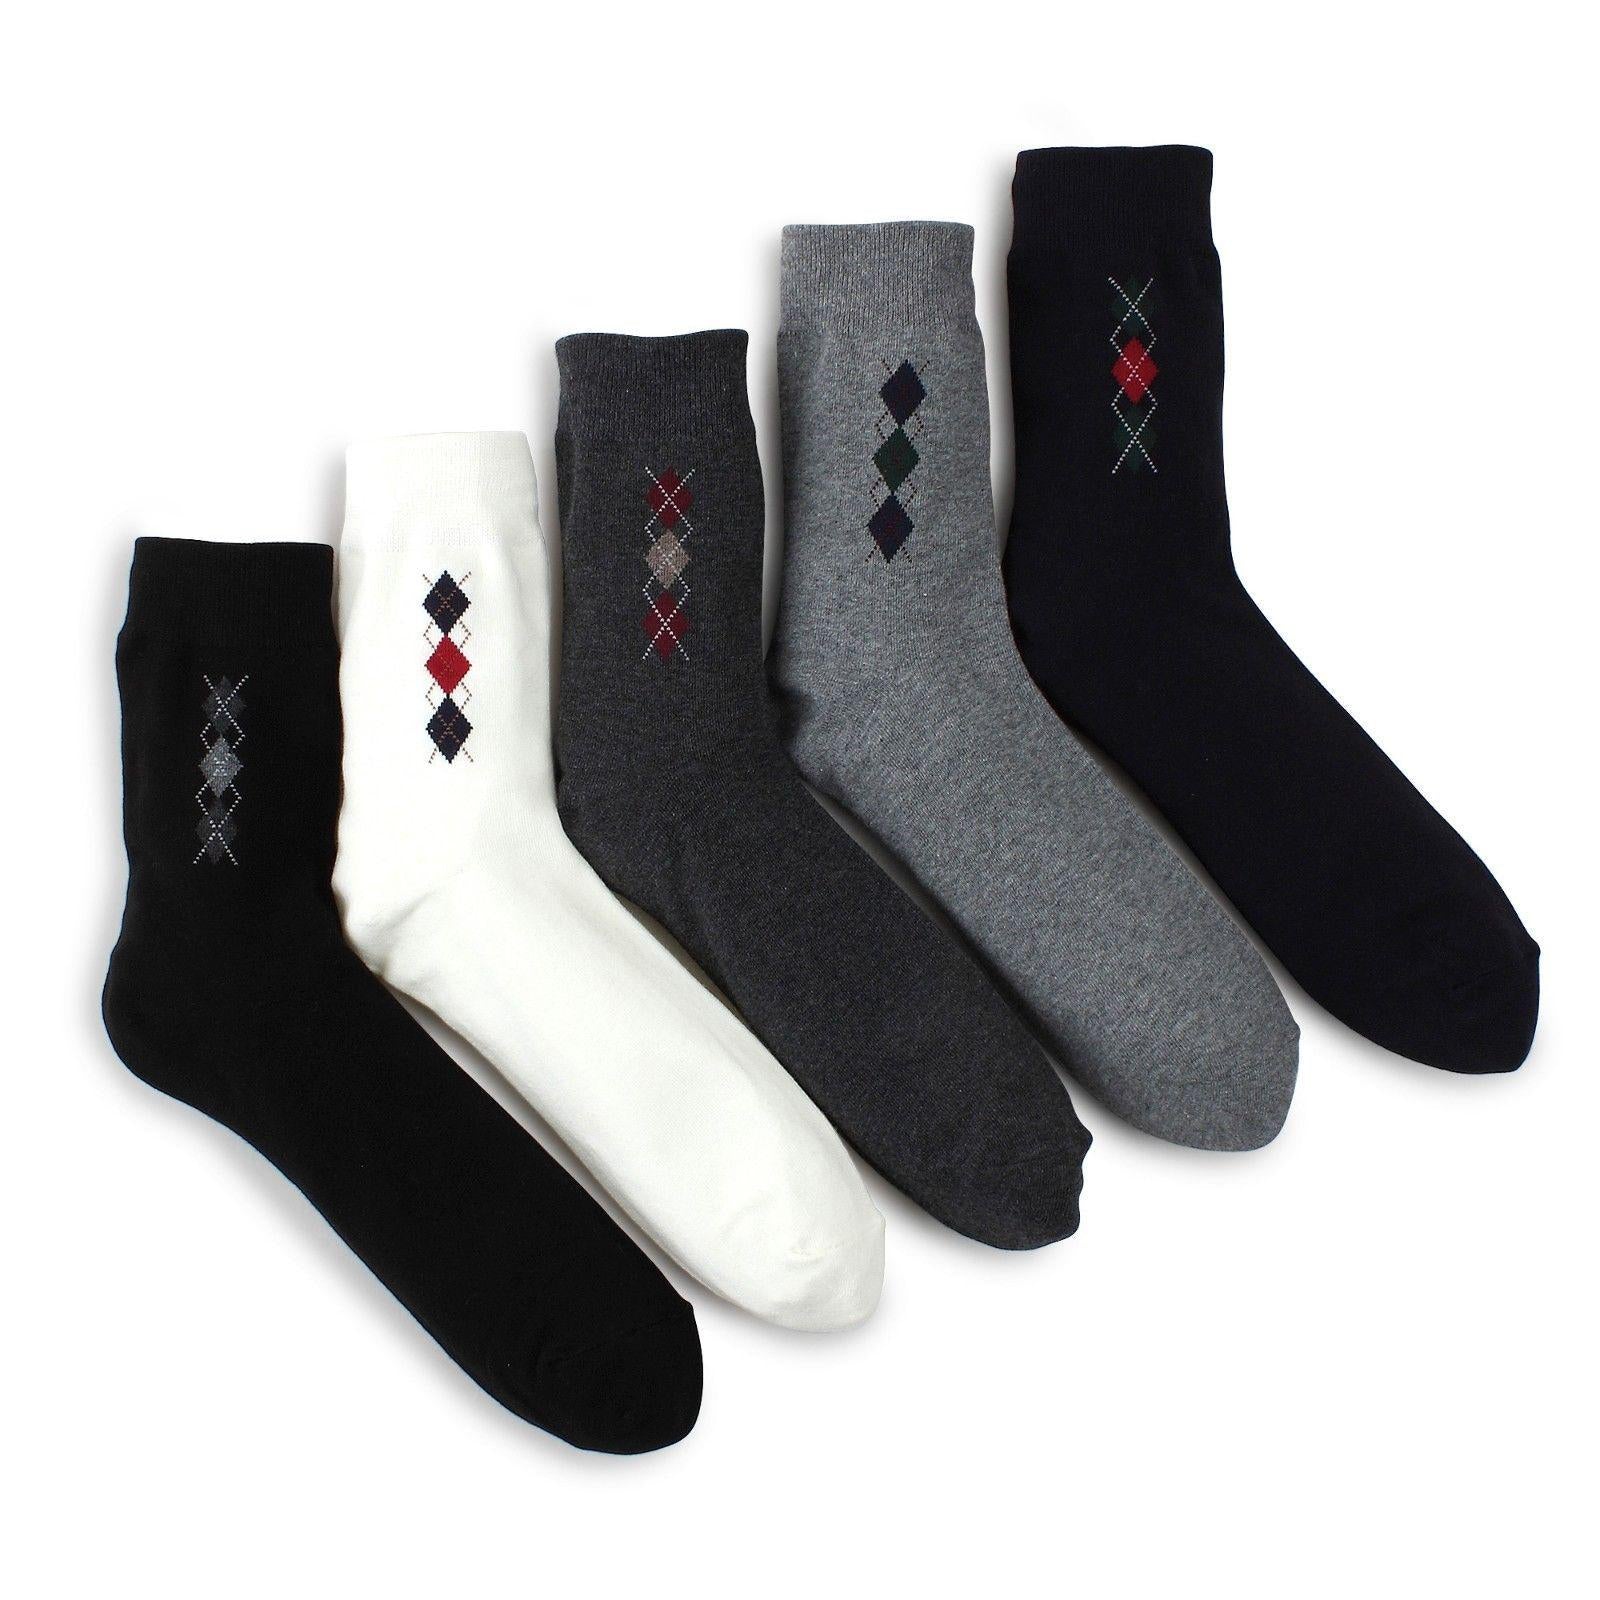 (5 Pairs) Classic Argyle Socks Men Solid Fashion Socks Loafer Daily Working QG15